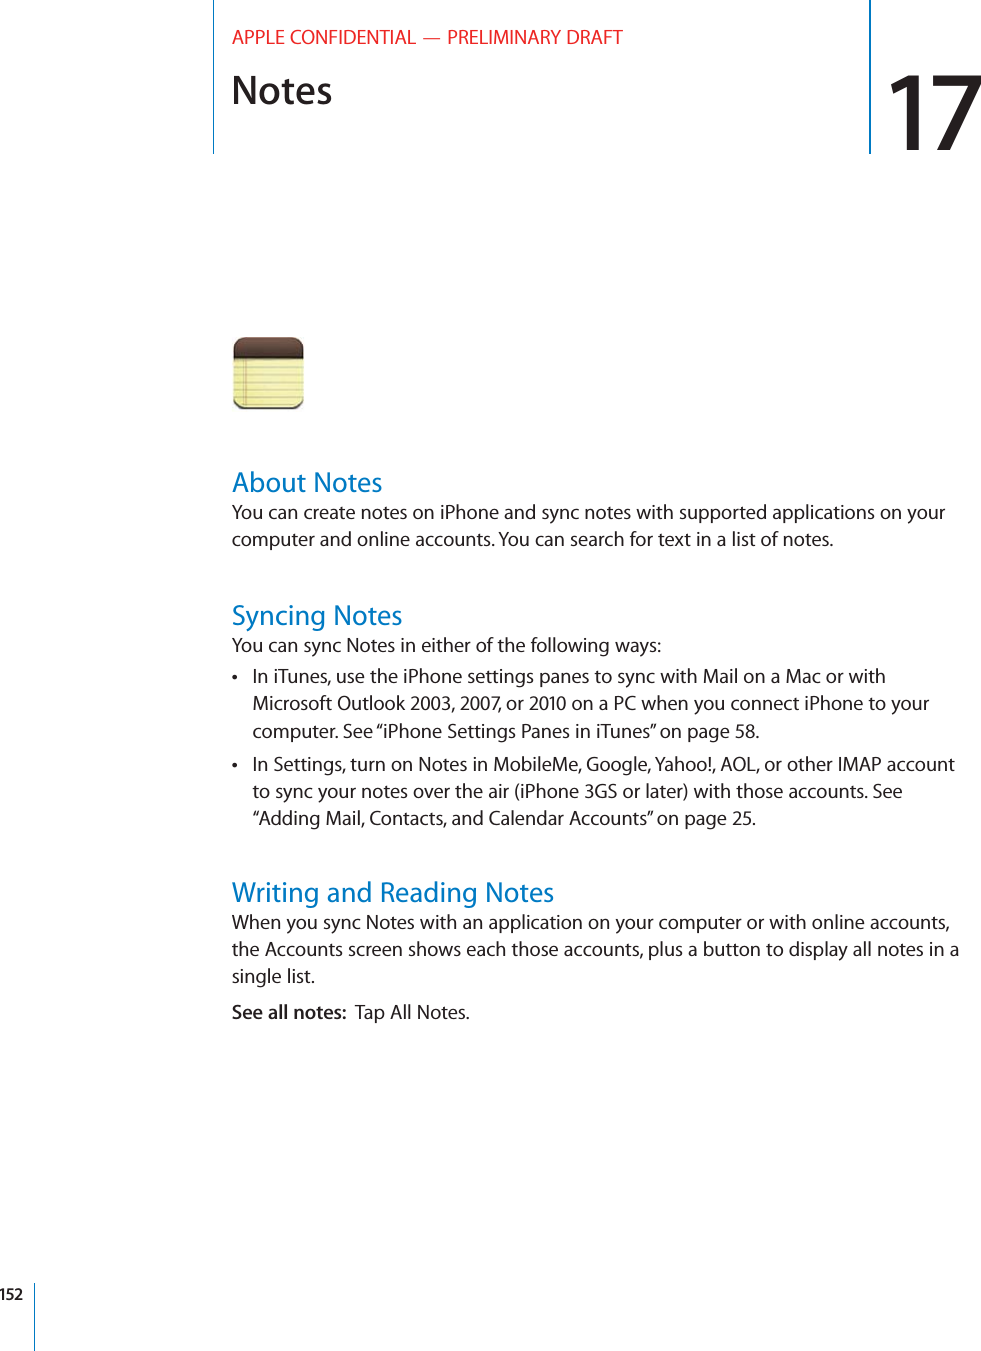 Notes 17APPLE CONFIDENTIAL — PRELIMINARY DRAFTAbout NotesYou can create notes on iPhone and sync notes with supported applications on your computer and online accounts. You can search for text in a list of notes.Syncing NotesYou can sync Notes in either of the following ways:In iTunes, use the iPhone settings panes to sync with Mail on a Mac or with  Microsoft Outlook 2003, 2007, or 2010 on a PC when you connect iPhone to your computer. See “iPhone Settings Panes in iTunes” on page 58.In Settings, turn on Notes in MobileMe, Google, Yahoo!, AOL, or other IMAP account  to sync your notes over the air (iPhone 3GS or later) with those accounts. See “Adding Mail, Contacts, and Calendar Accounts” on page 25.Writing and Reading NotesWhen you sync Notes with an application on your computer or with online accounts, the Accounts screen shows each those accounts, plus a button to display all notes in a single list.See all notes:  Tap All Notes.152